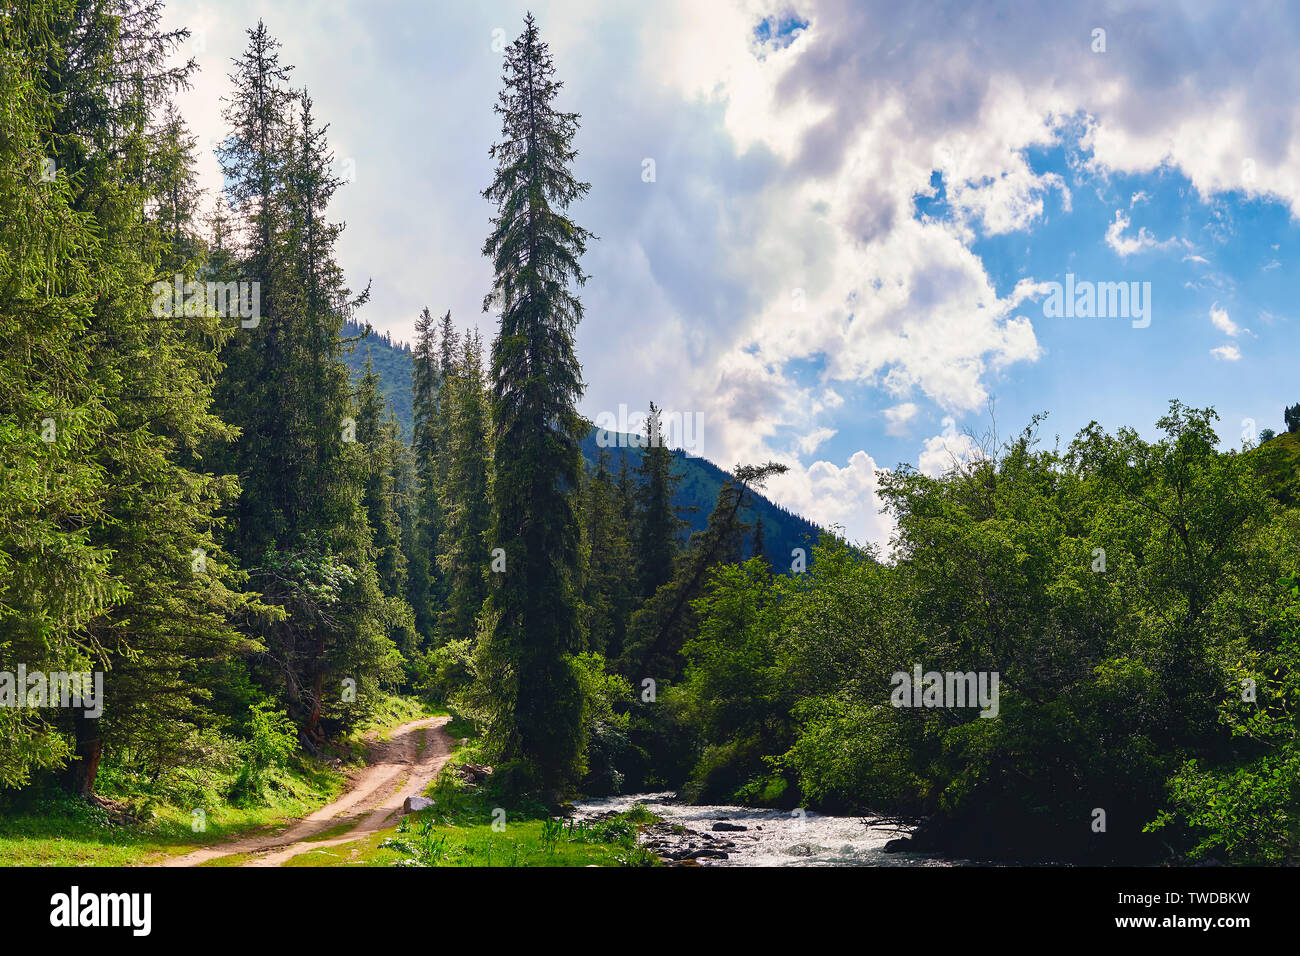 Mountain forest road landscape. Green mountains with tall firs. The road goes up the mountain river Stock Photo